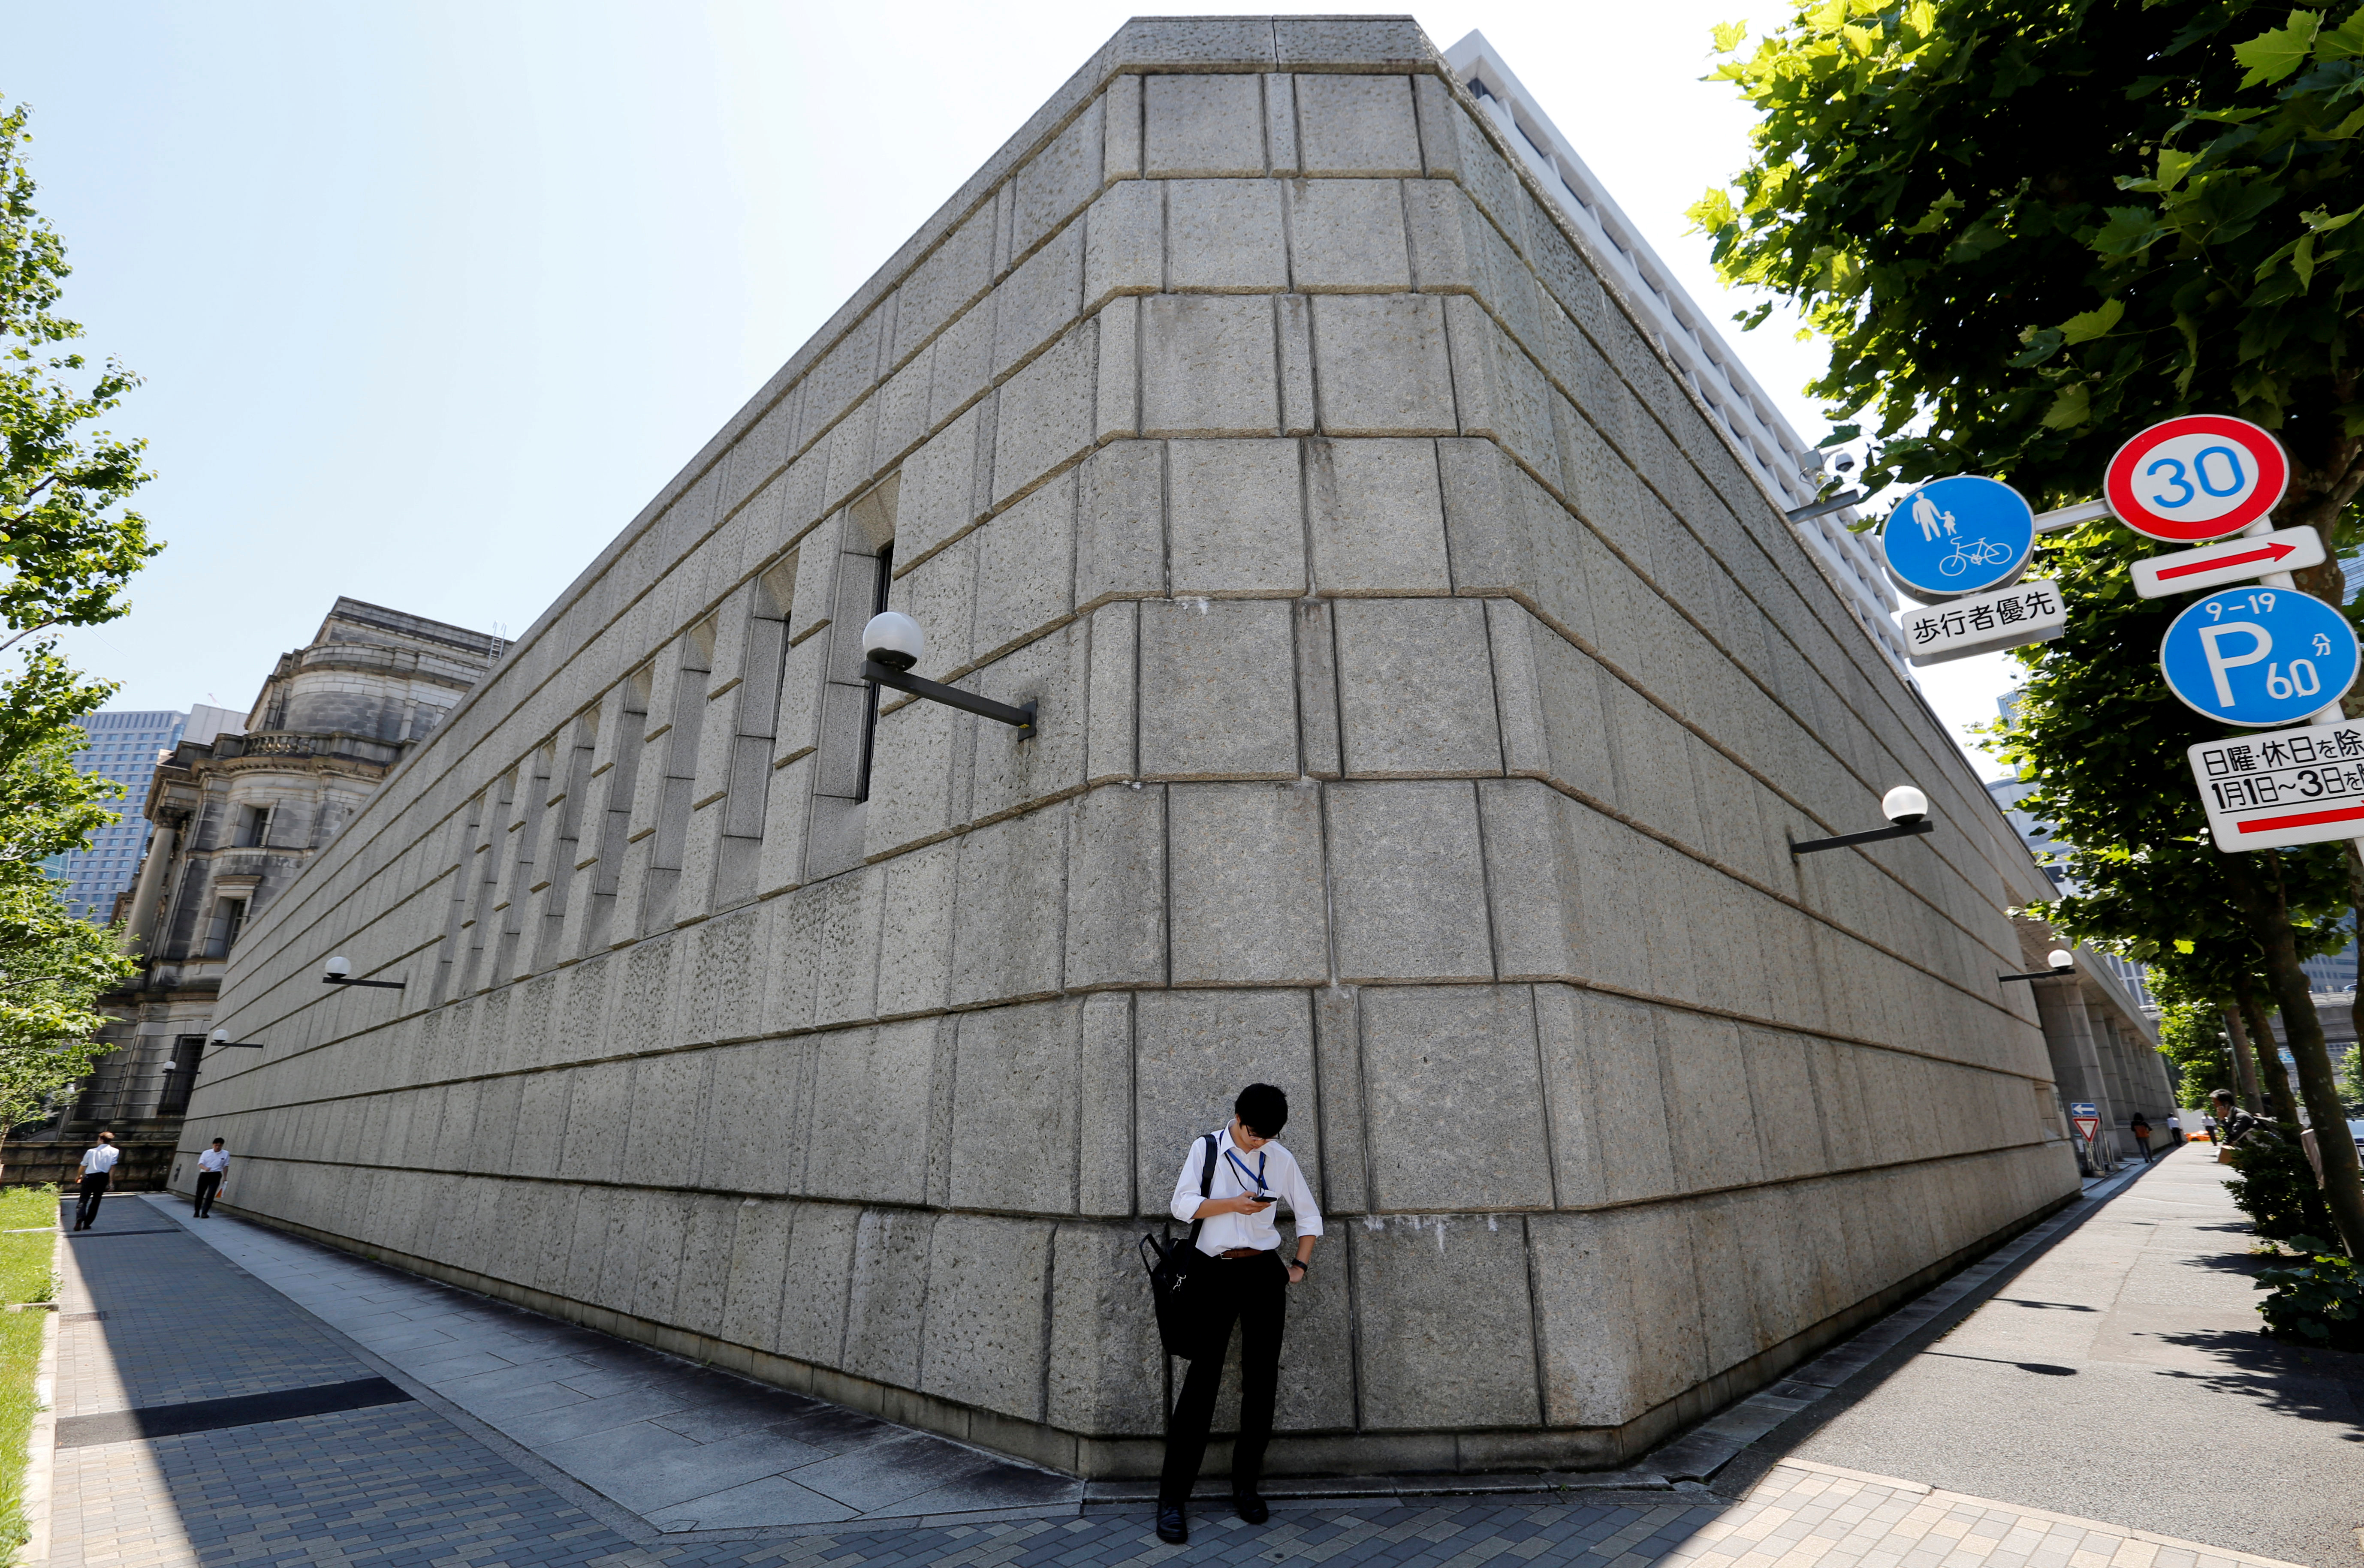 A man looks at a mobile phone in front of the Bank of Japan building in Tokyo, Japan June 16, 2017. REUTERS/Toru Hanai